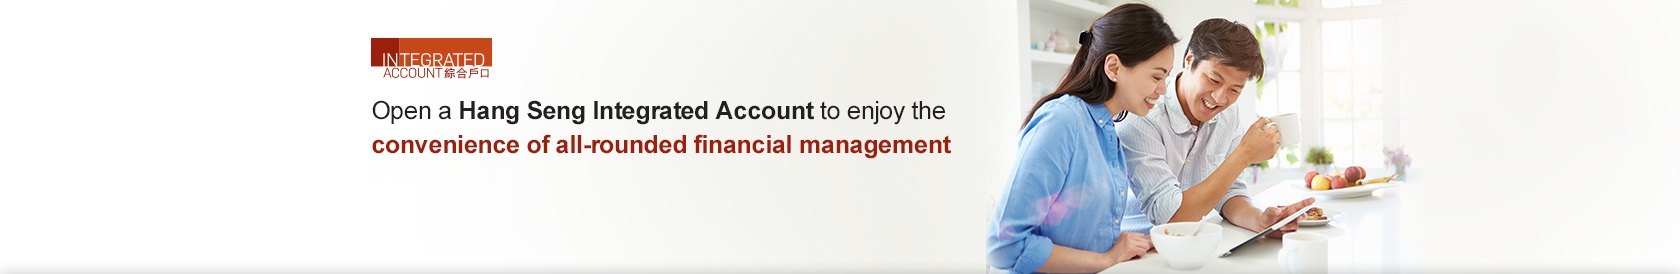 Open a Hang Seng Integrated Account to enjoy the convenience of all-rounded financial management